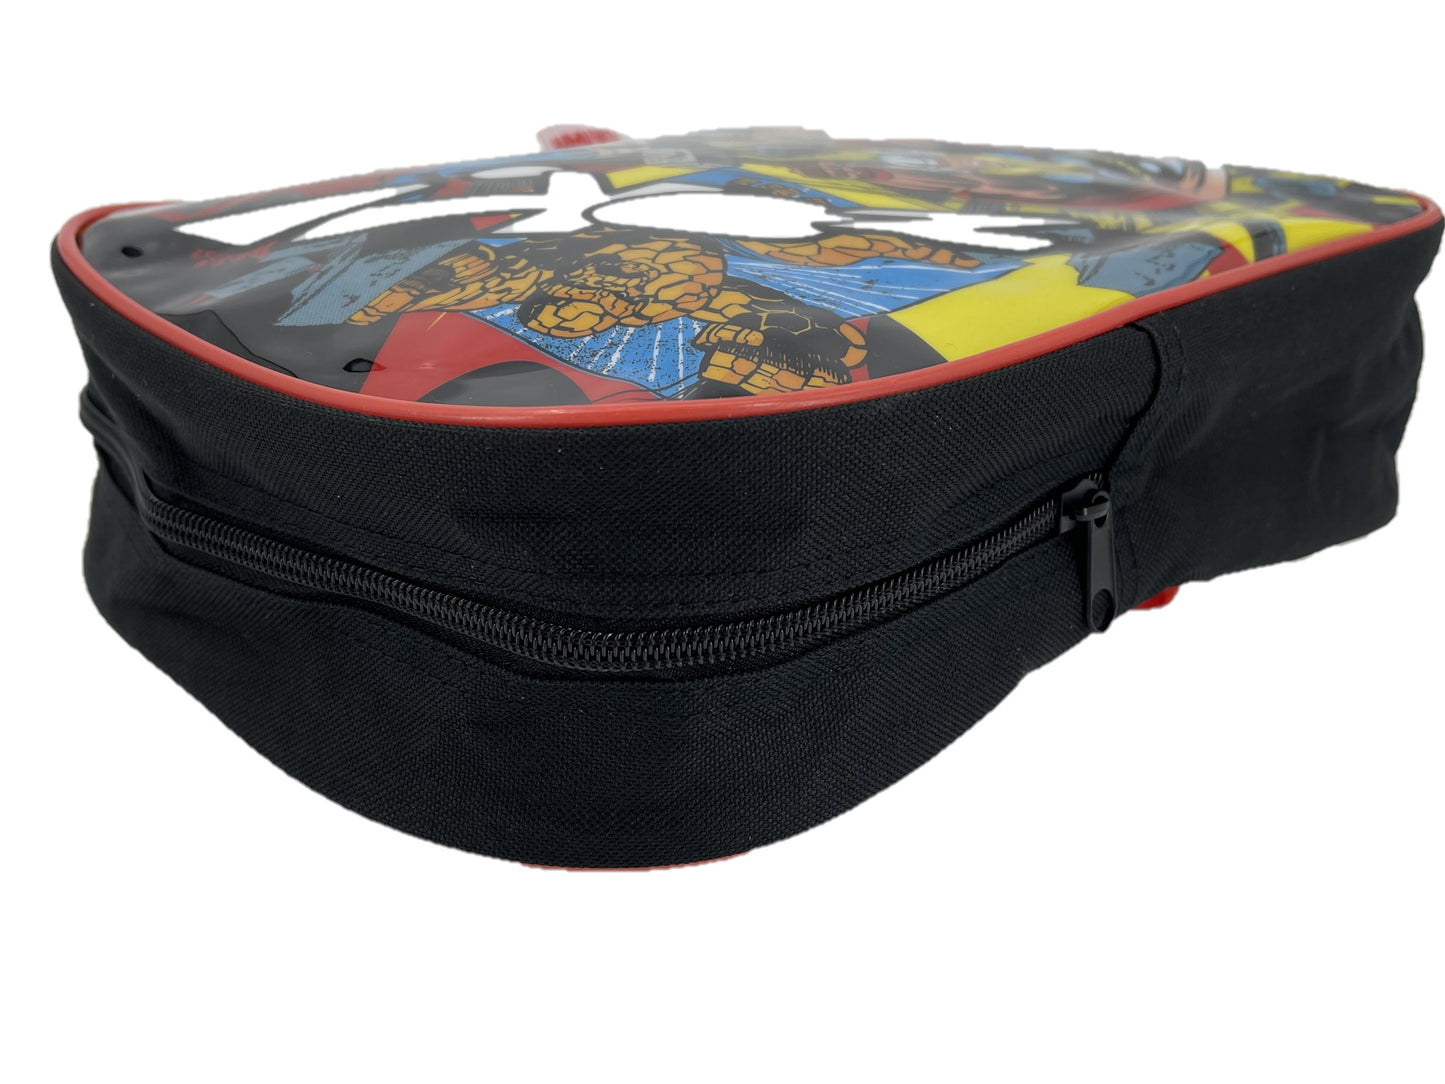 Marvel Children’s Superheroes Backpack, Ideal for School. With Spiderman, Thor